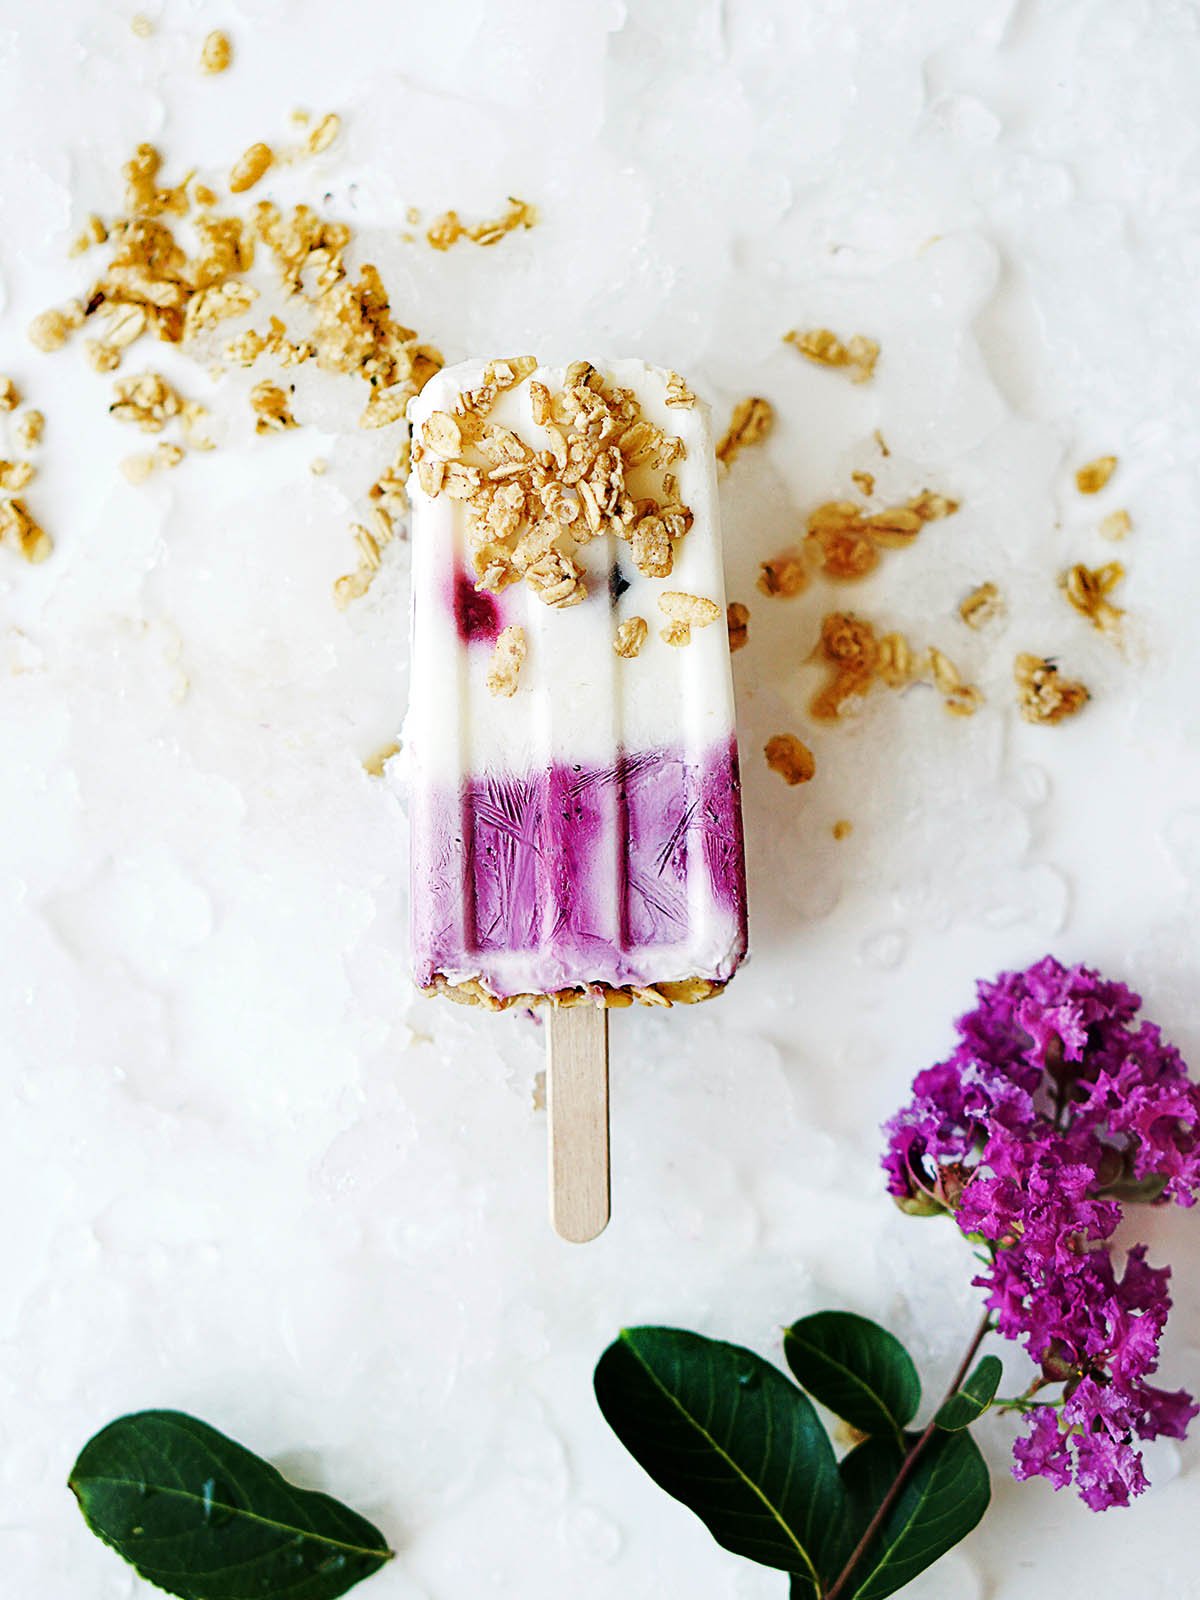 One Yogurt Berries Popsicle on a whiteboard with crushed ice on the bottom.